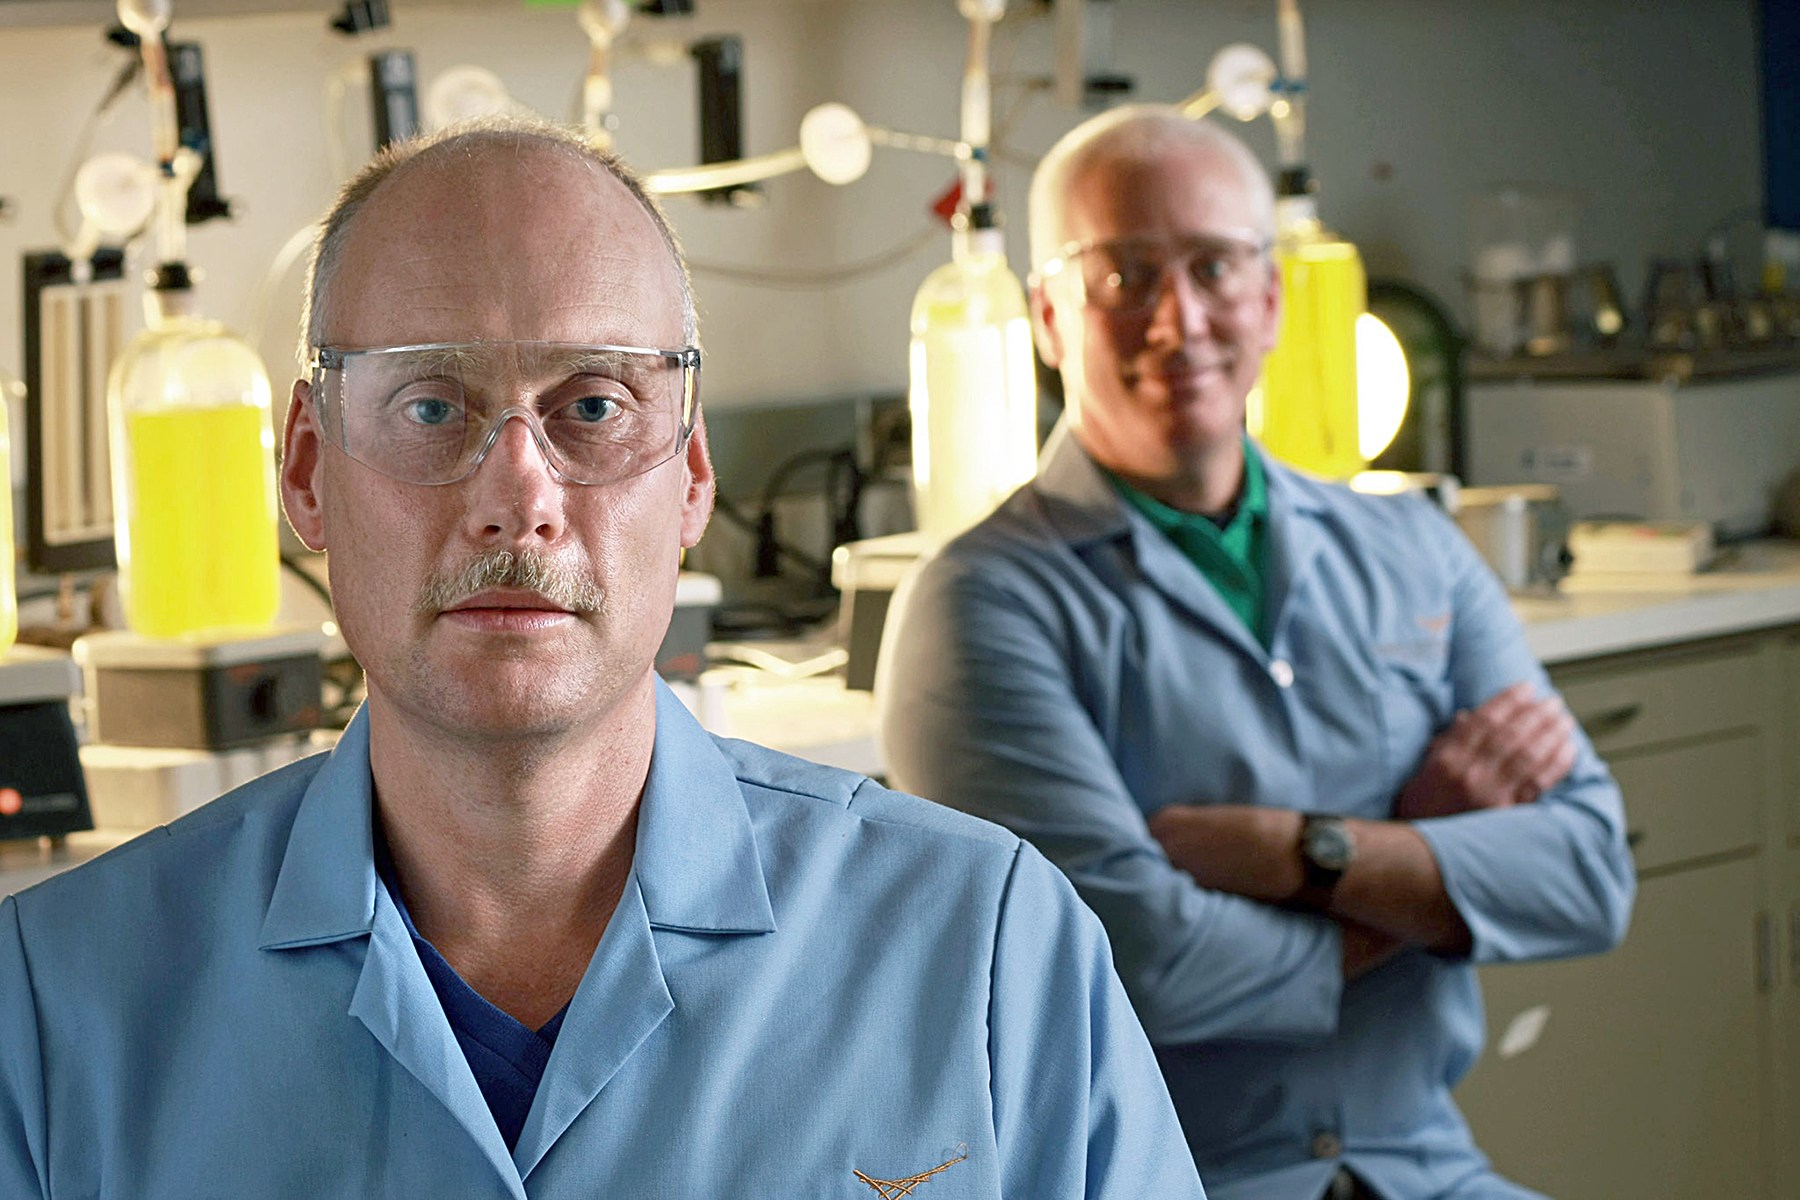 Scientists Michael Huesemann, in front, and Tom Hausmann continue work on finding the best strains of algae for biofuel production. (Pacific Northwest National Laboratory)